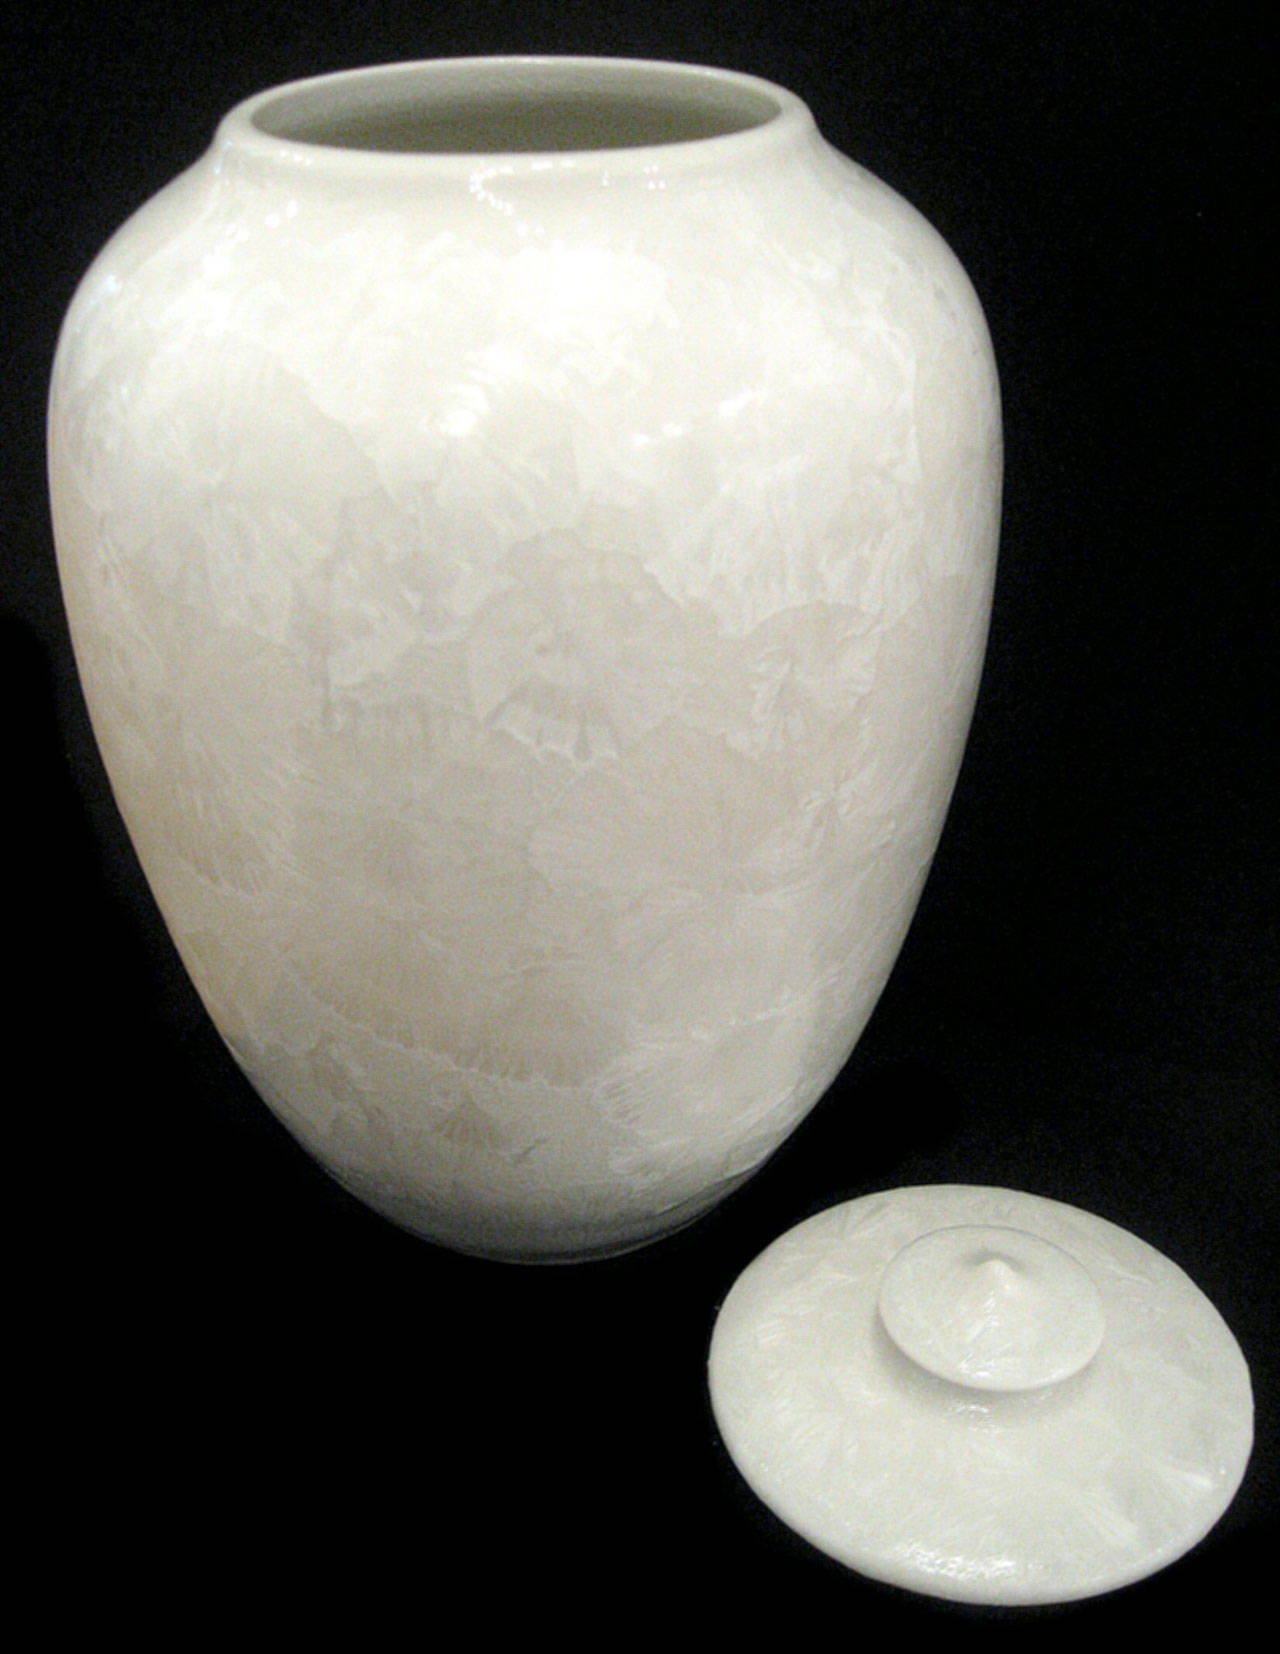 This arctic white crystalline vase by Gregory Felando will be featured during a group show at Blue Whole Gallery.